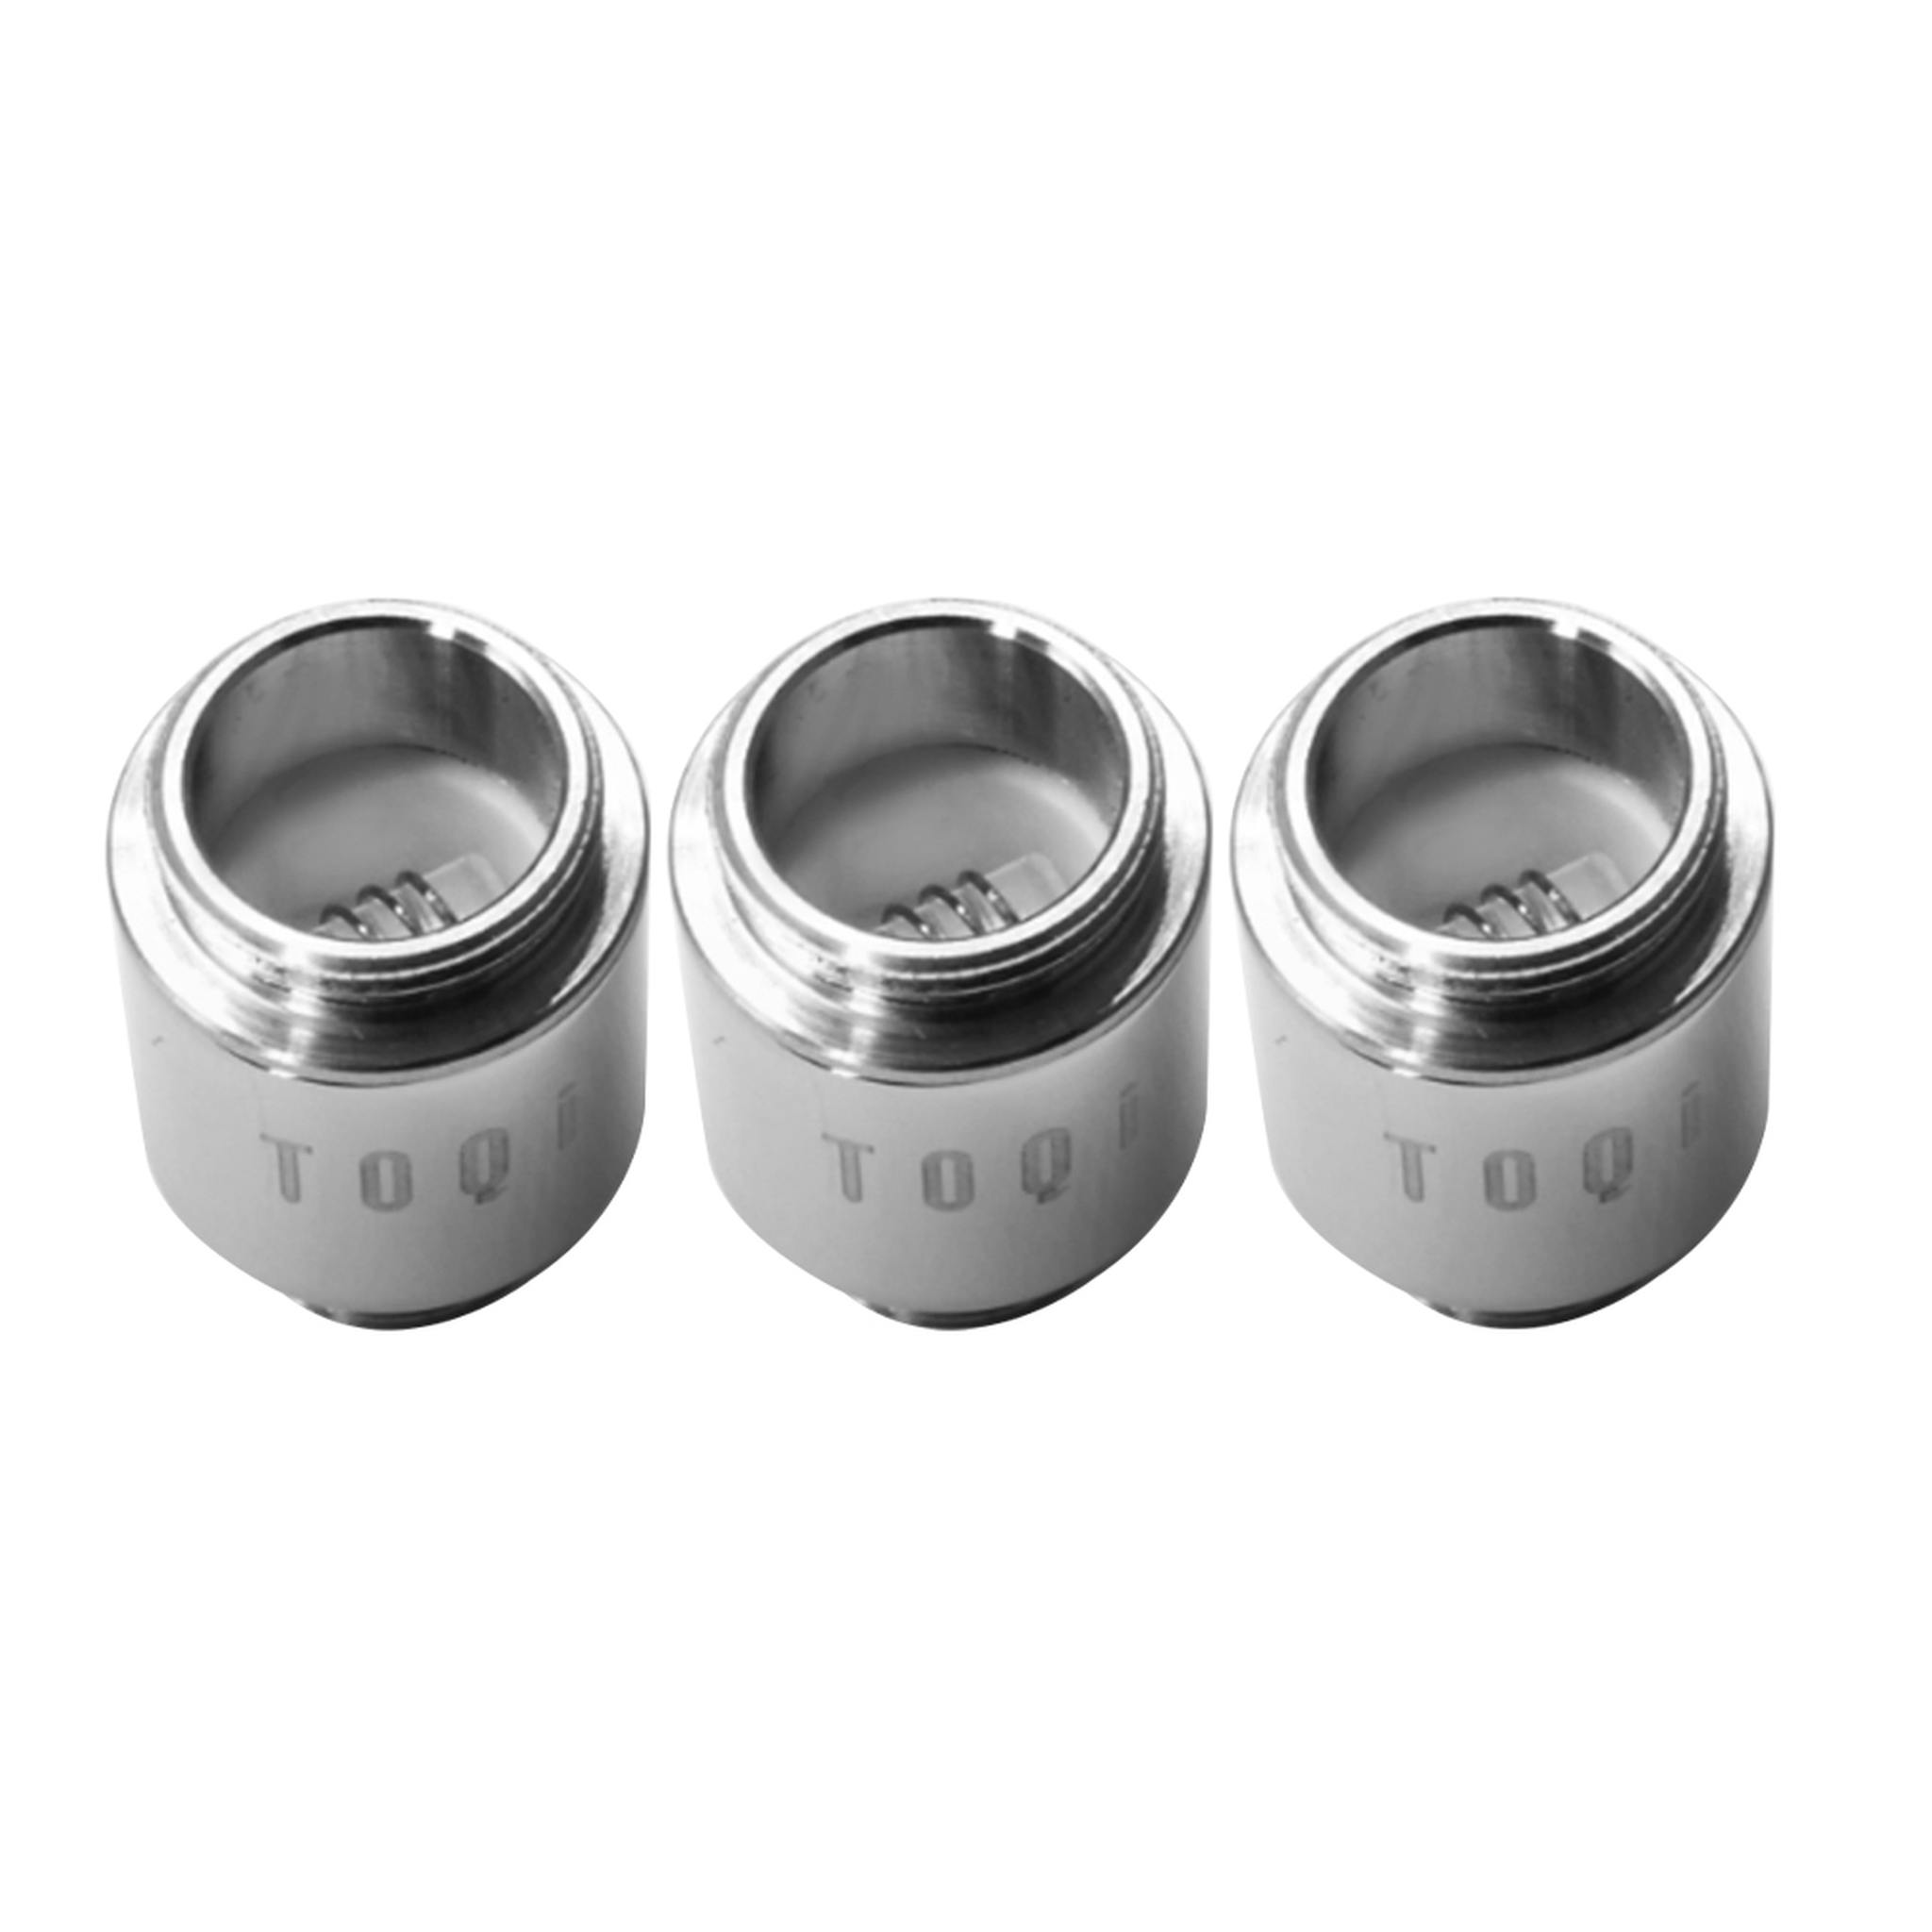 Toqi! 510 Wax Cartridge Coil Replacement - 3 pack